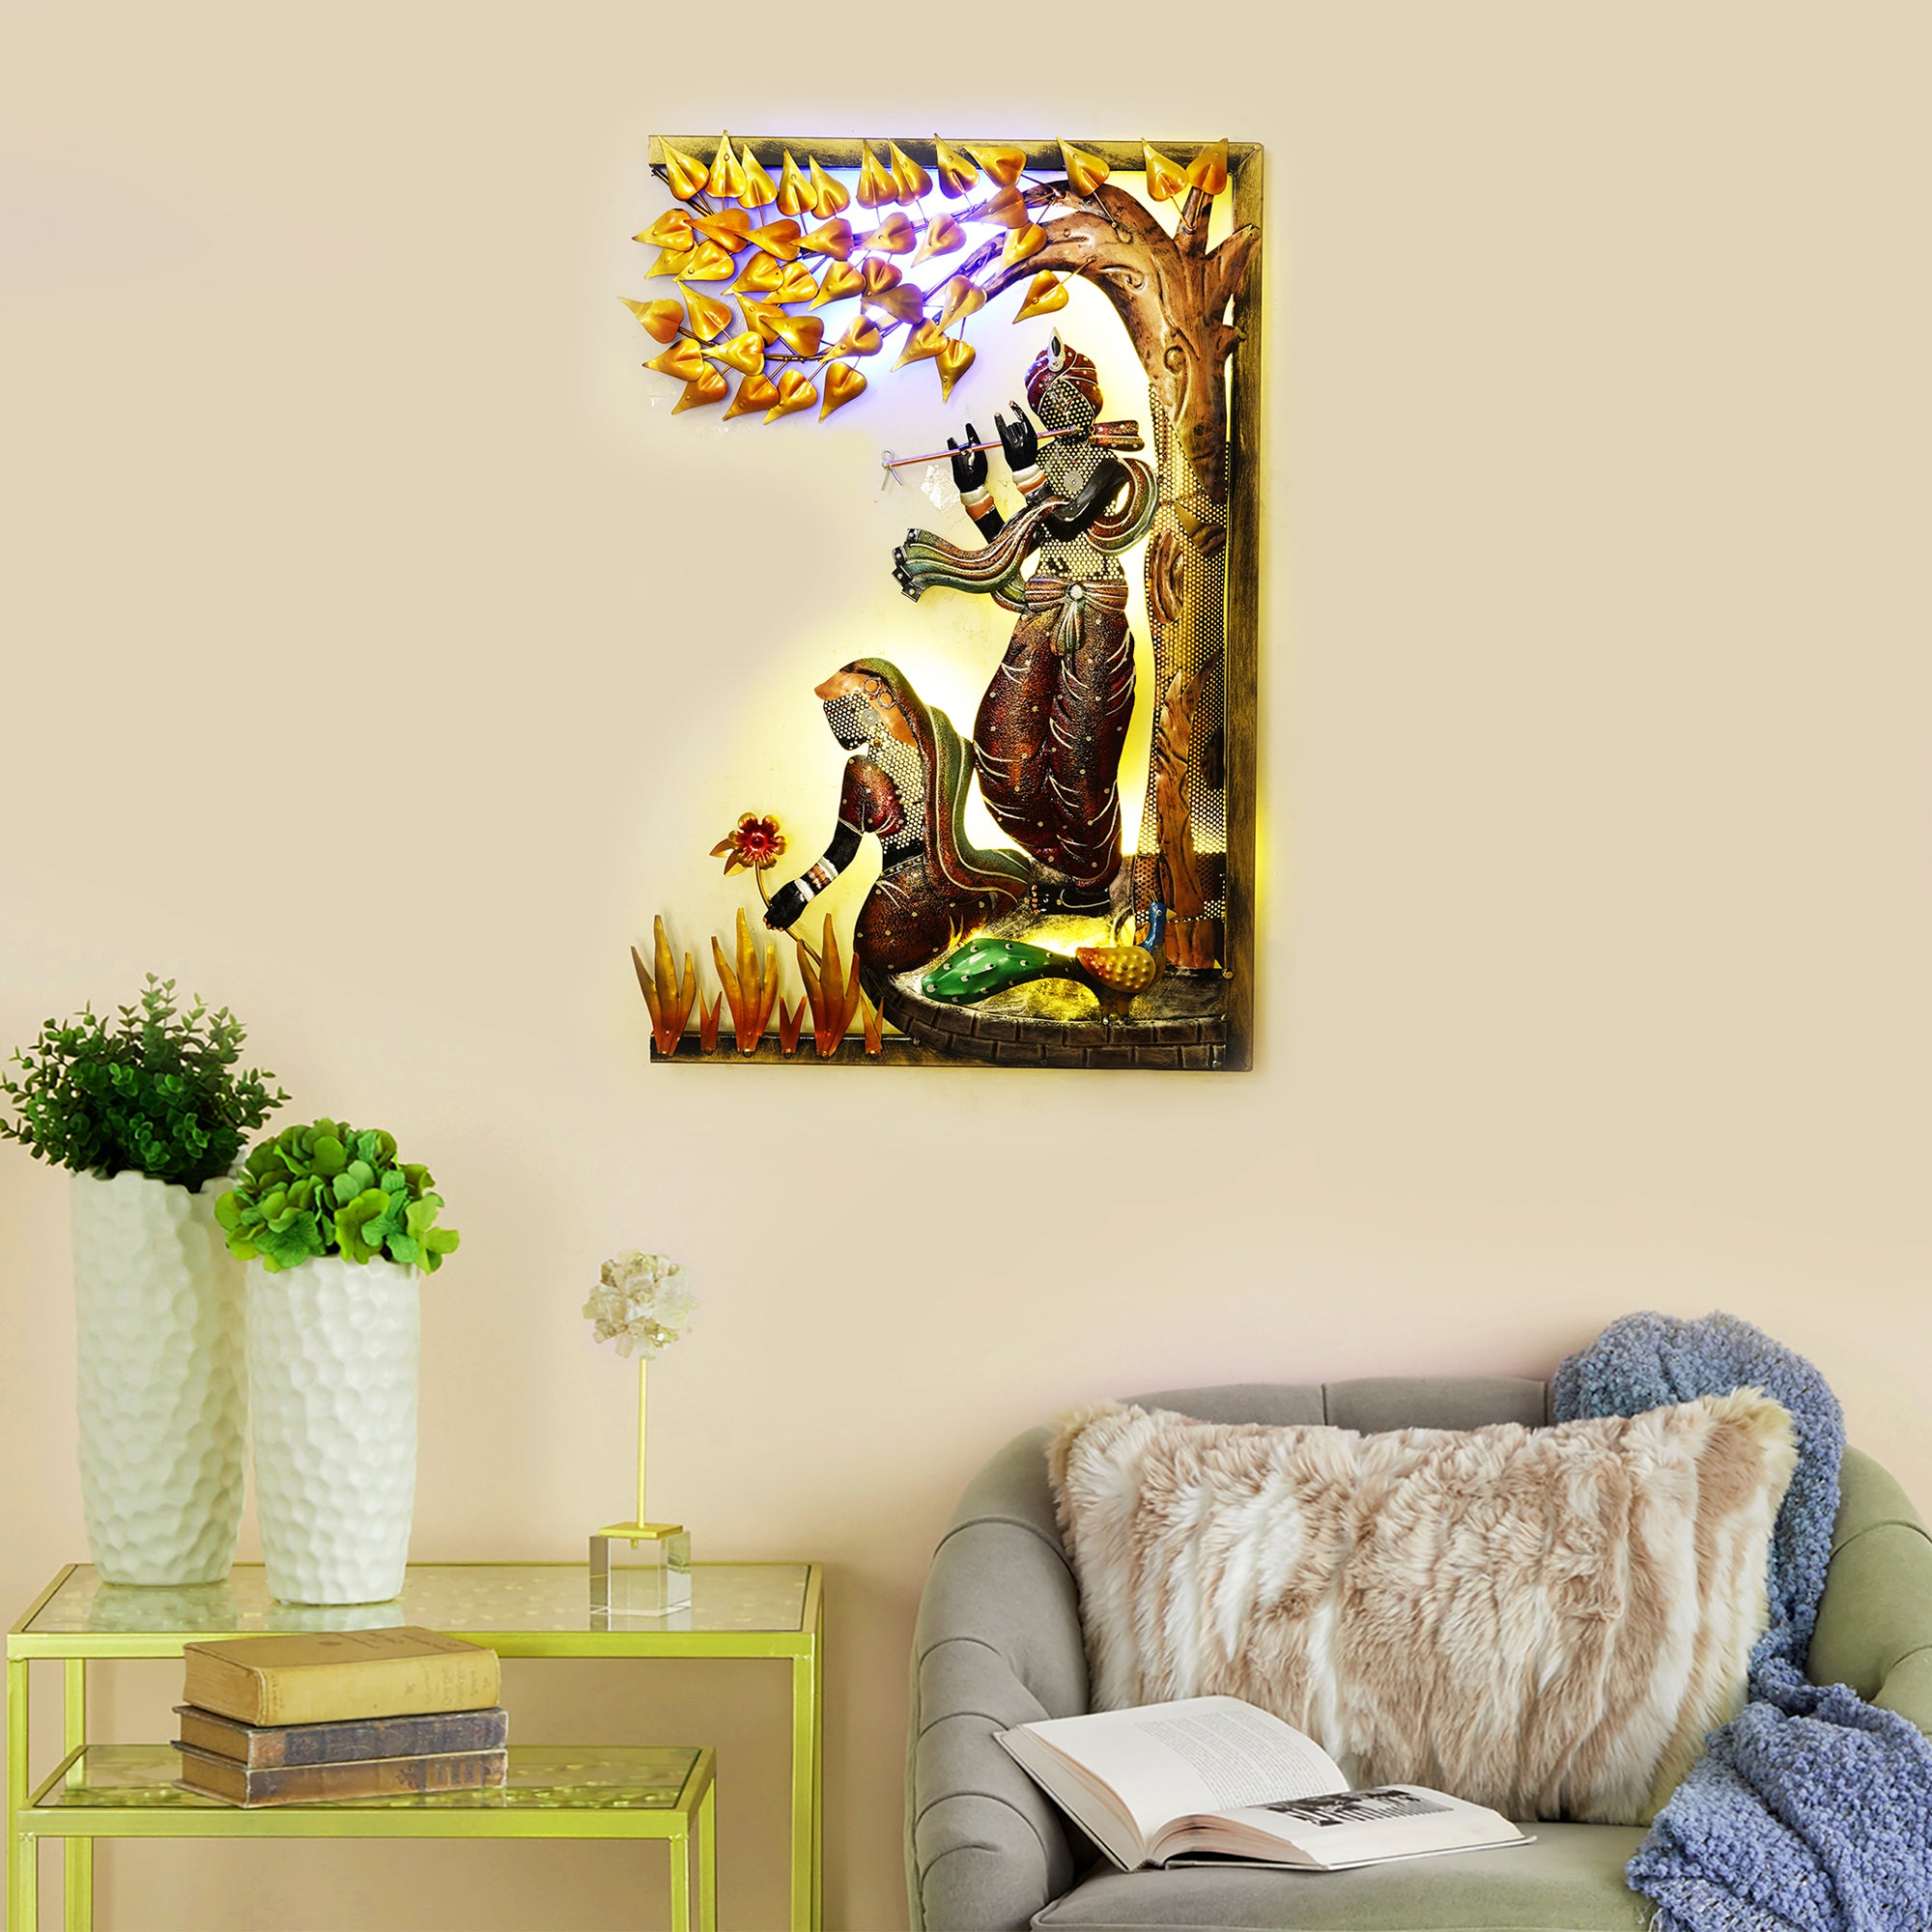 Lord krishna playing flute for radha Handcrafted Metal Wall Hanging with Background LED's 1